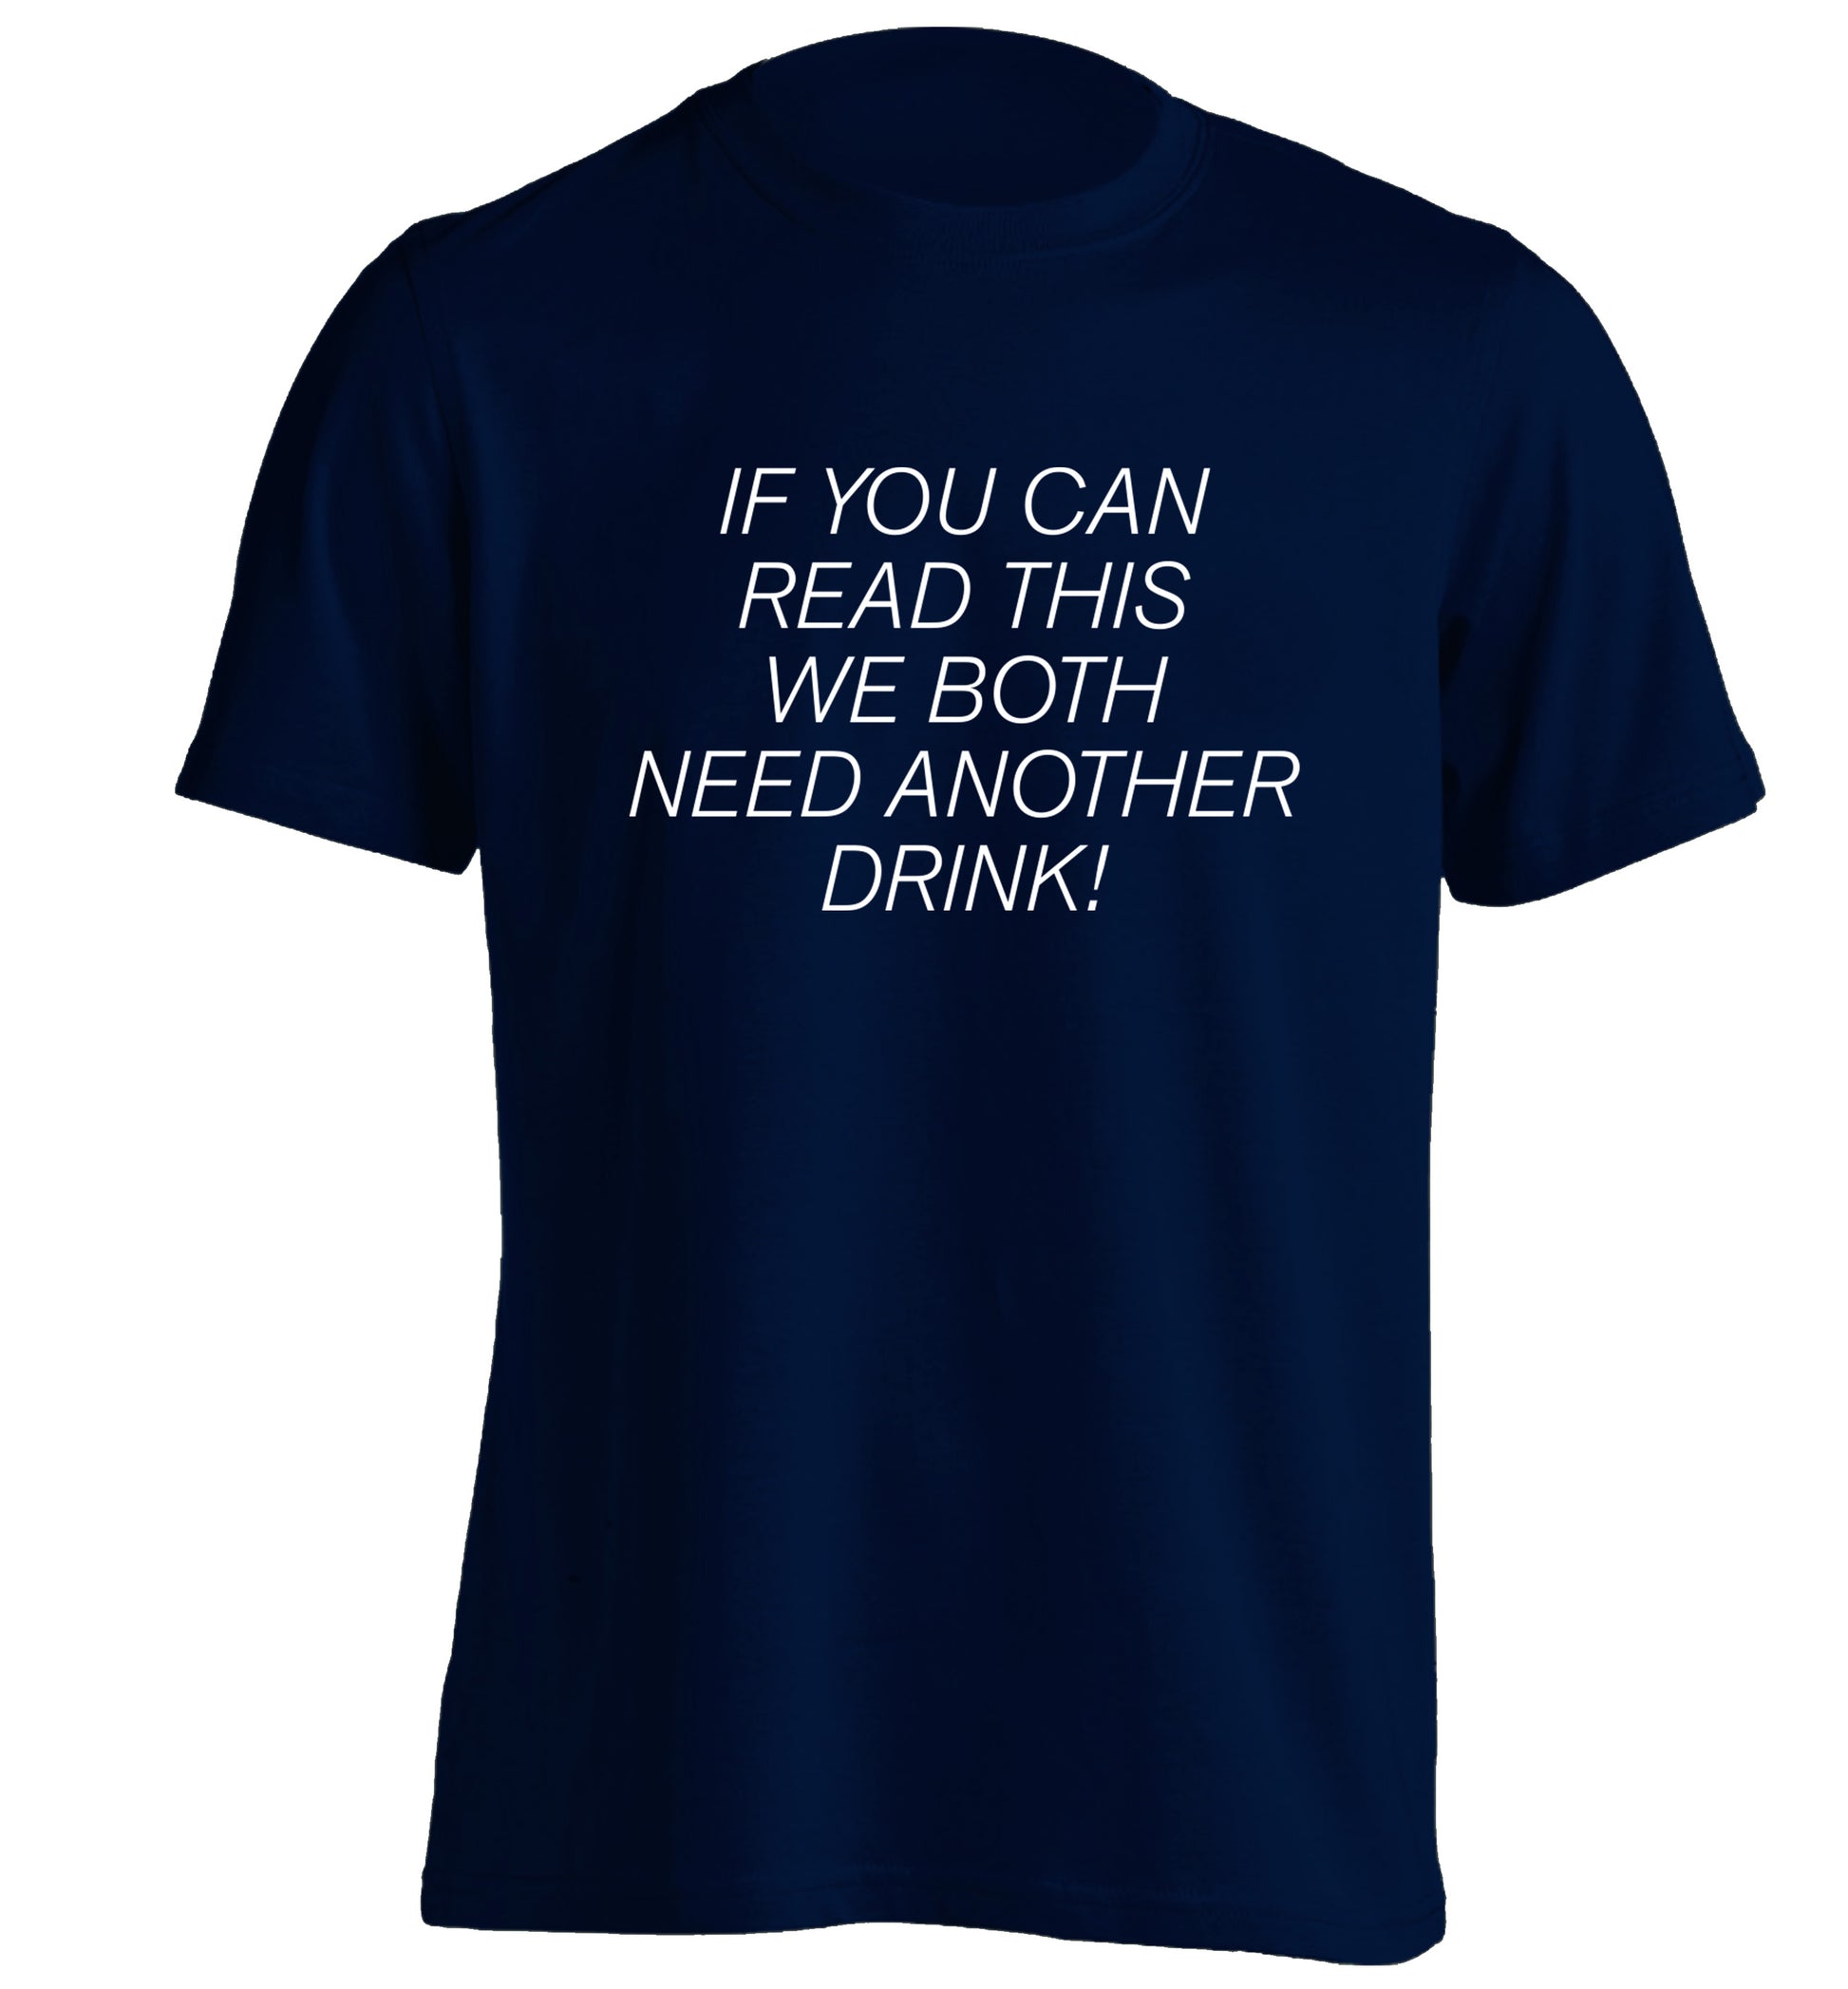 If you can read this we both need another drink! adults unisex navy Tshirt 2XL